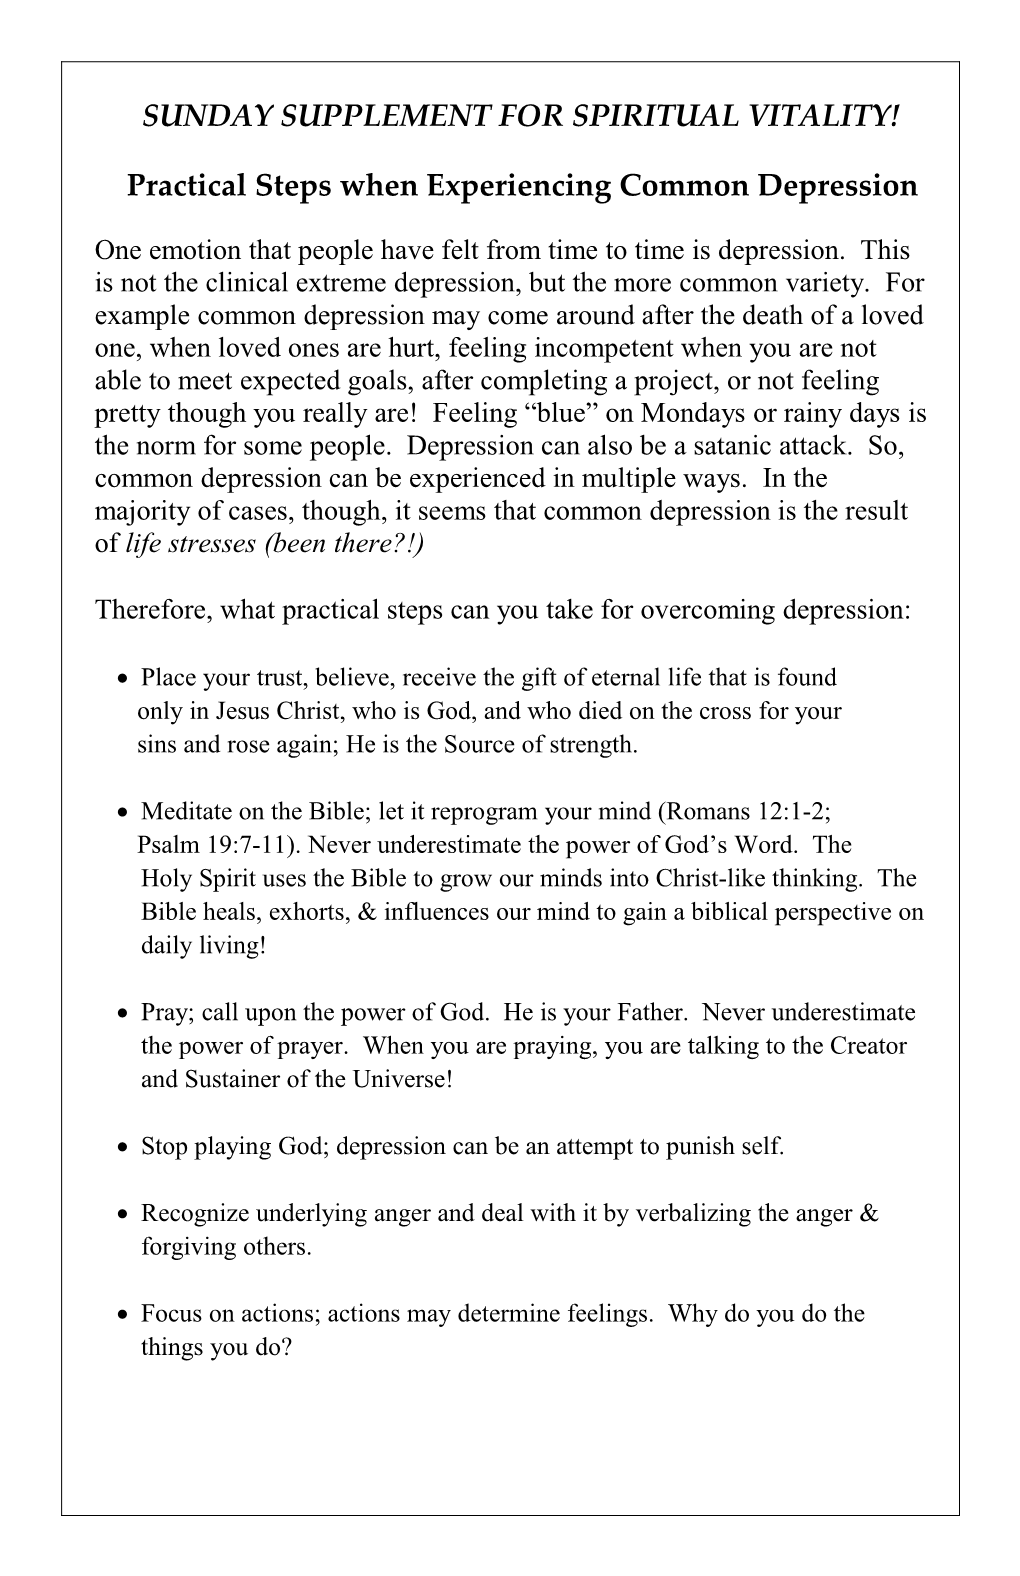 Practical Steps When Experiencing Common Depression